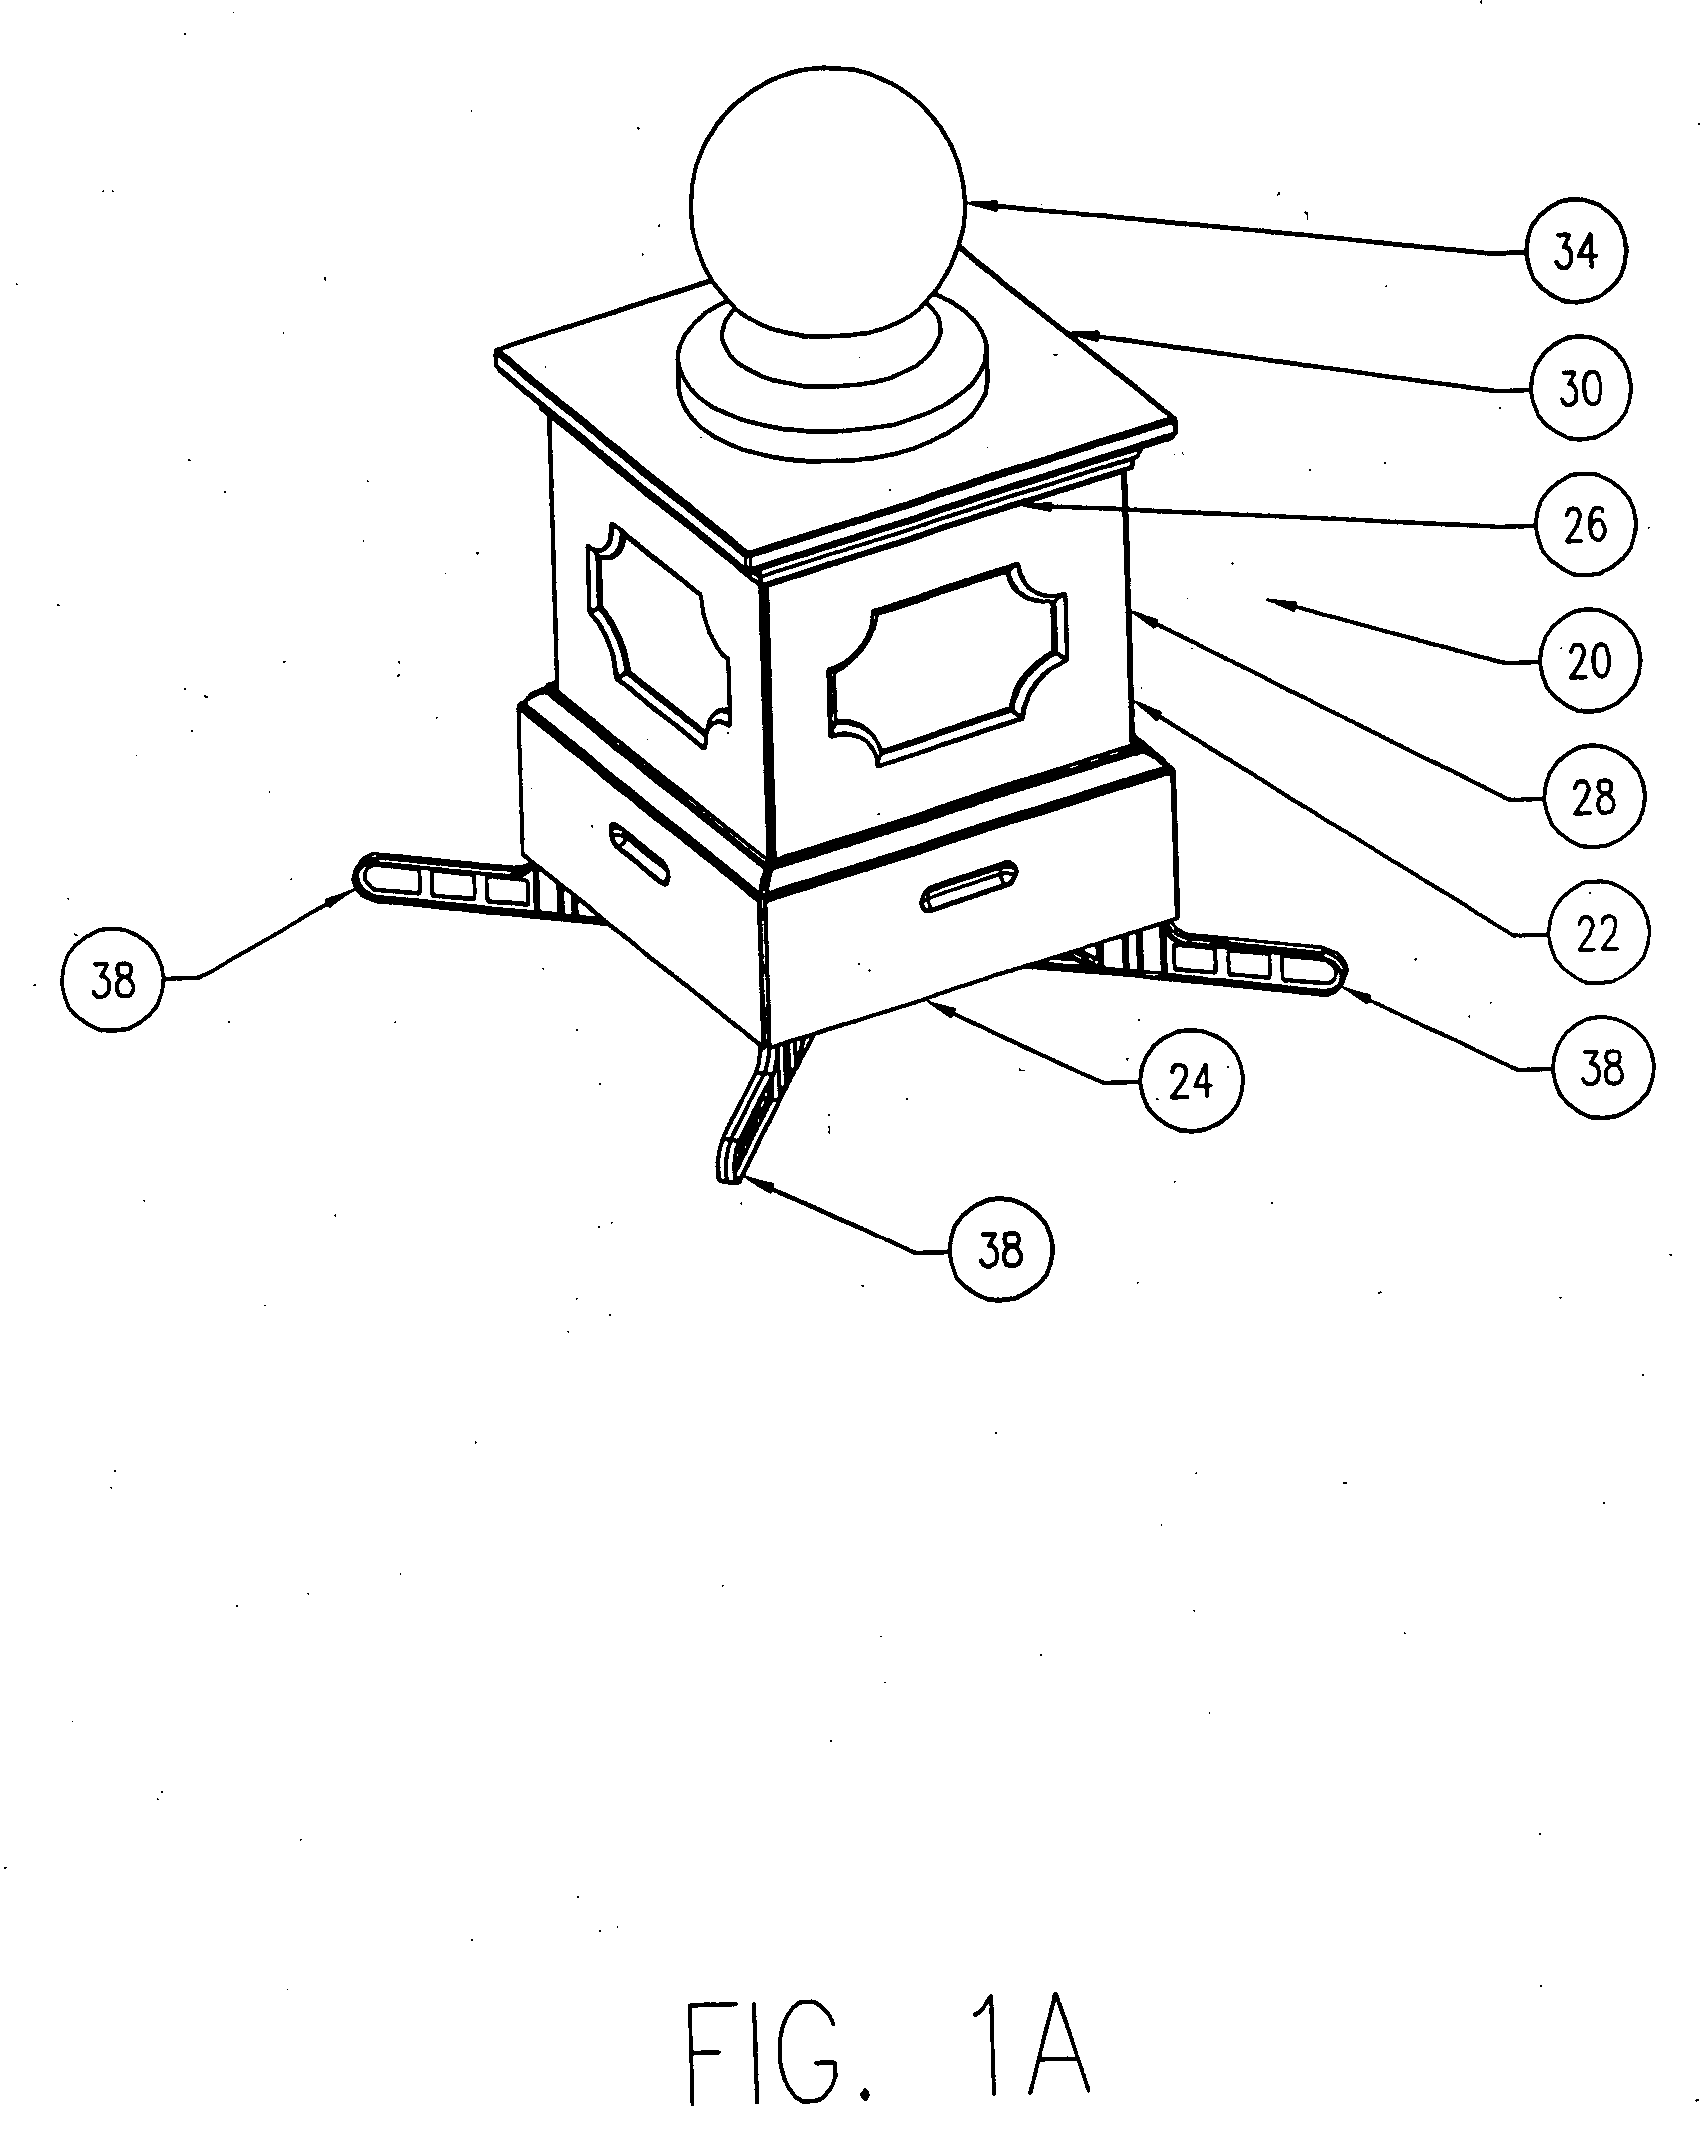 Composting device